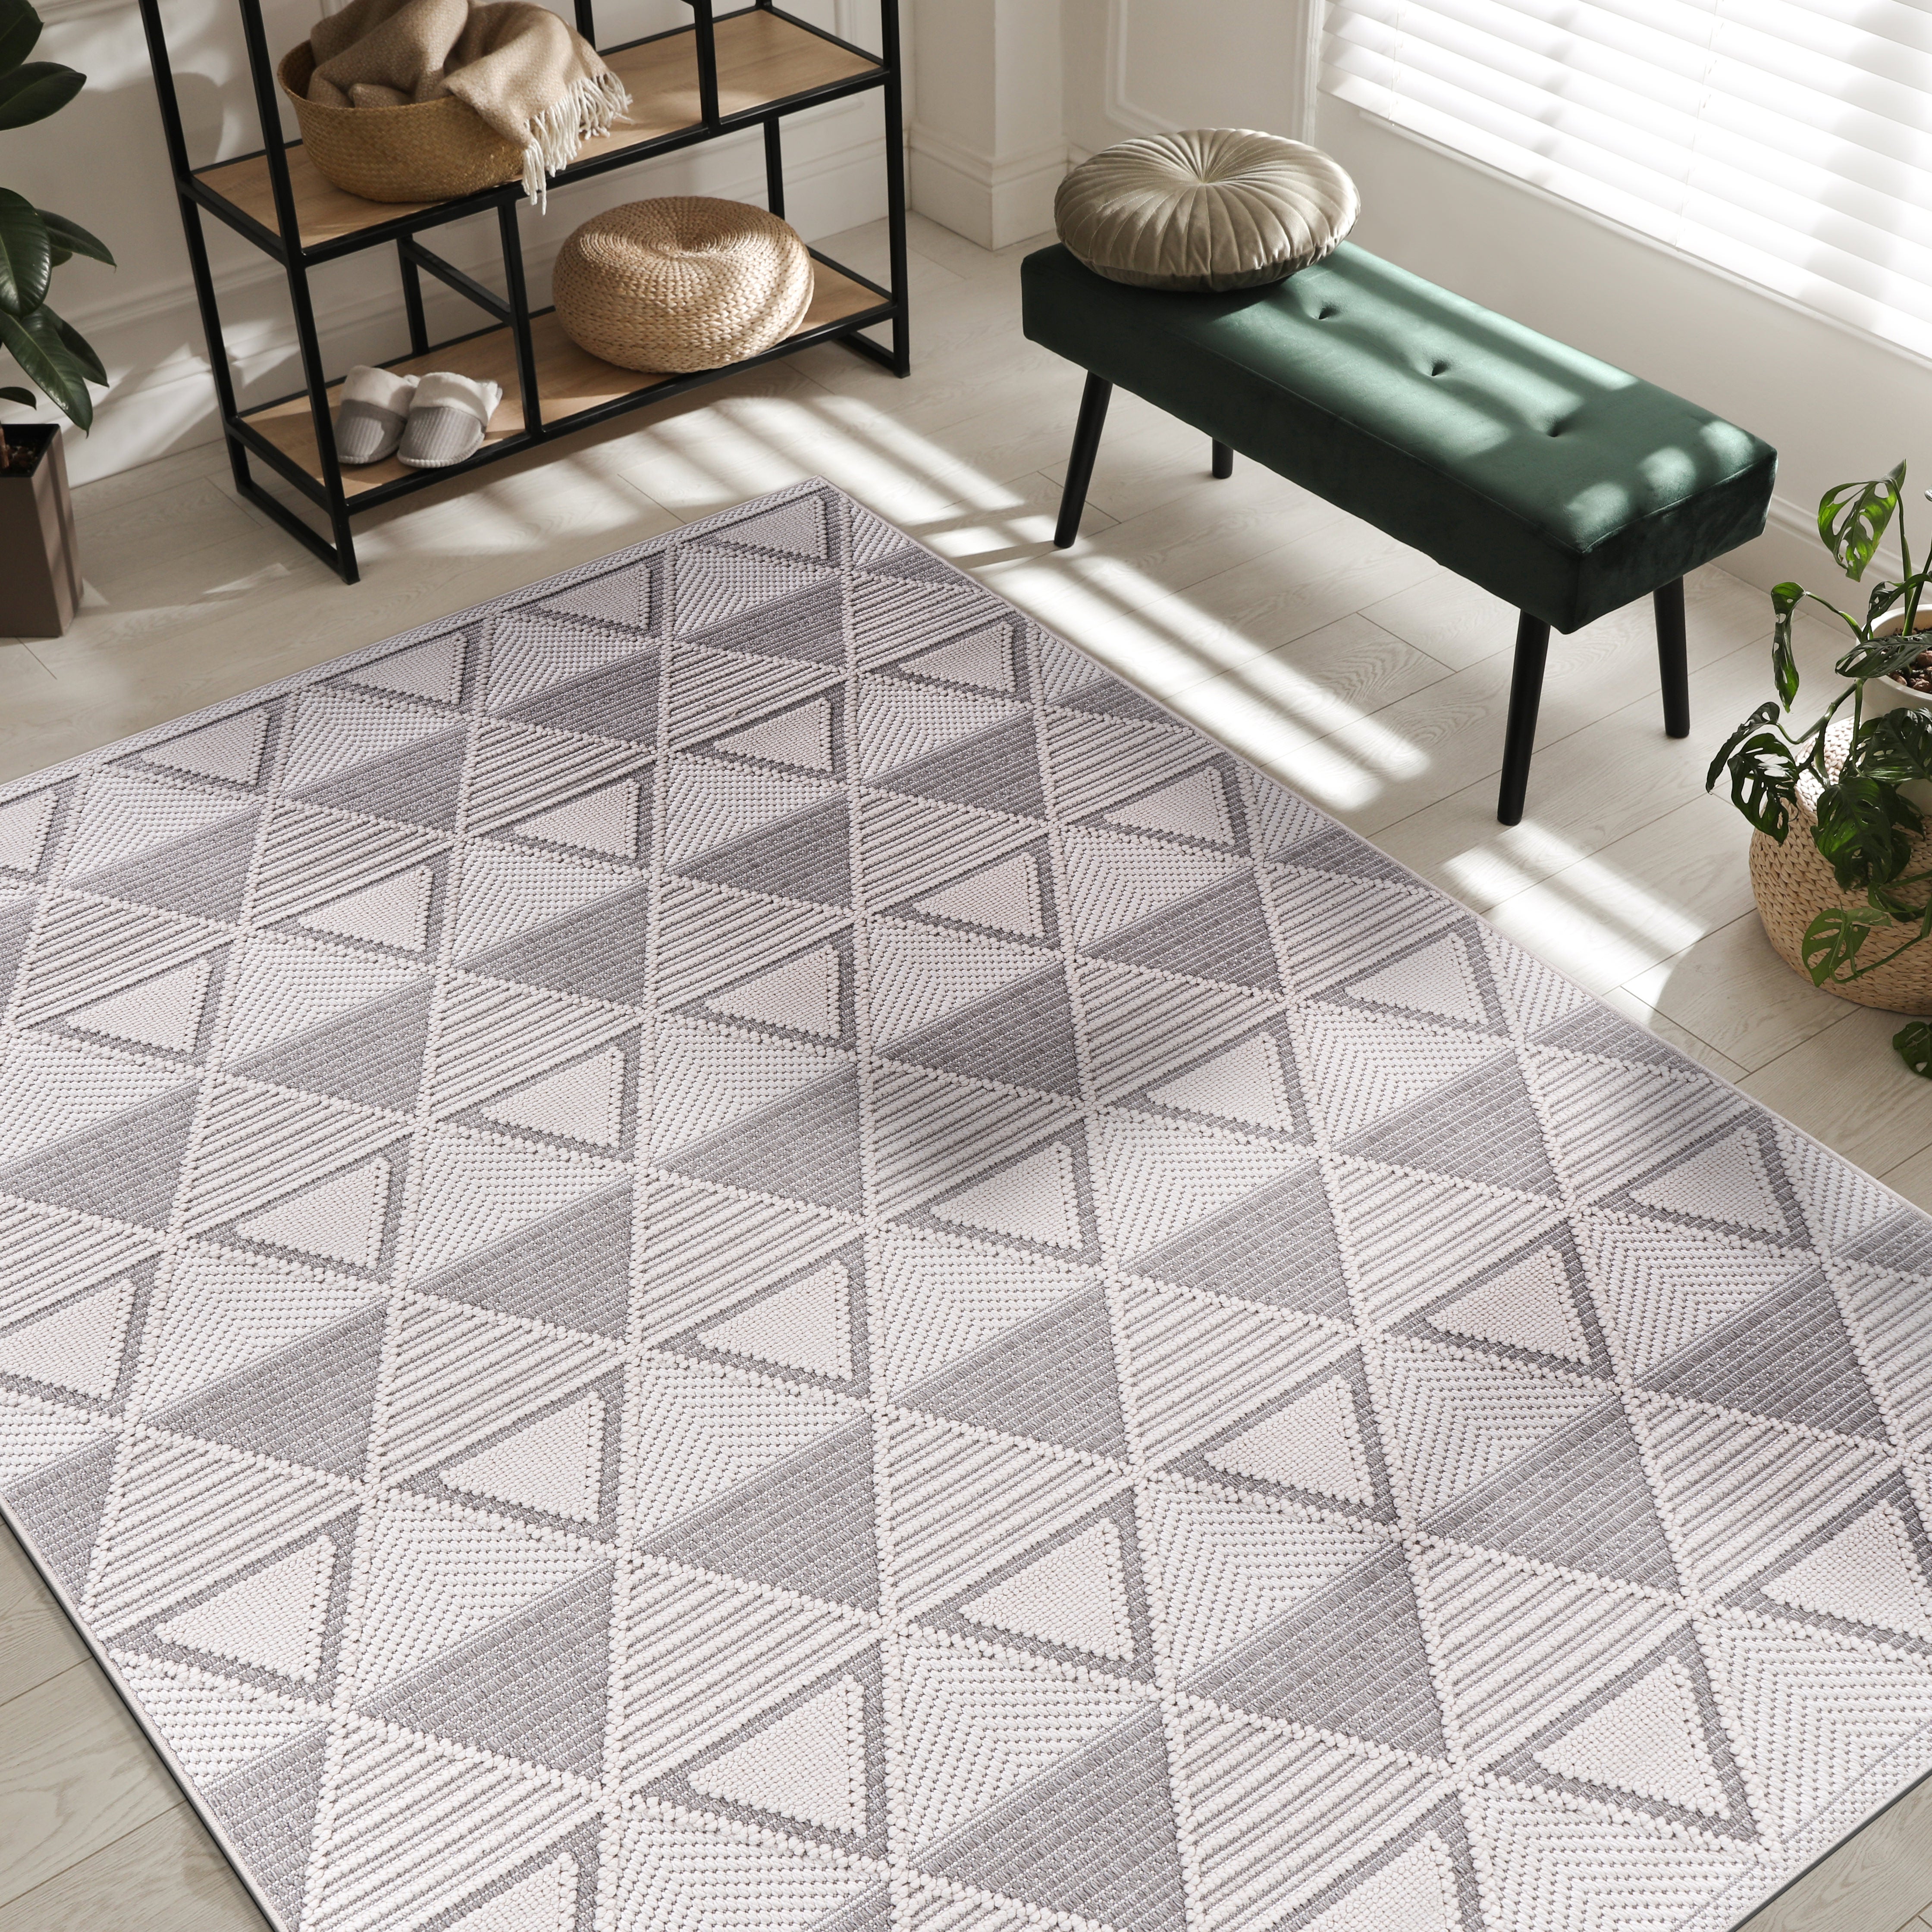 Micro Loop Area Rugs  GY7 - White / Gray